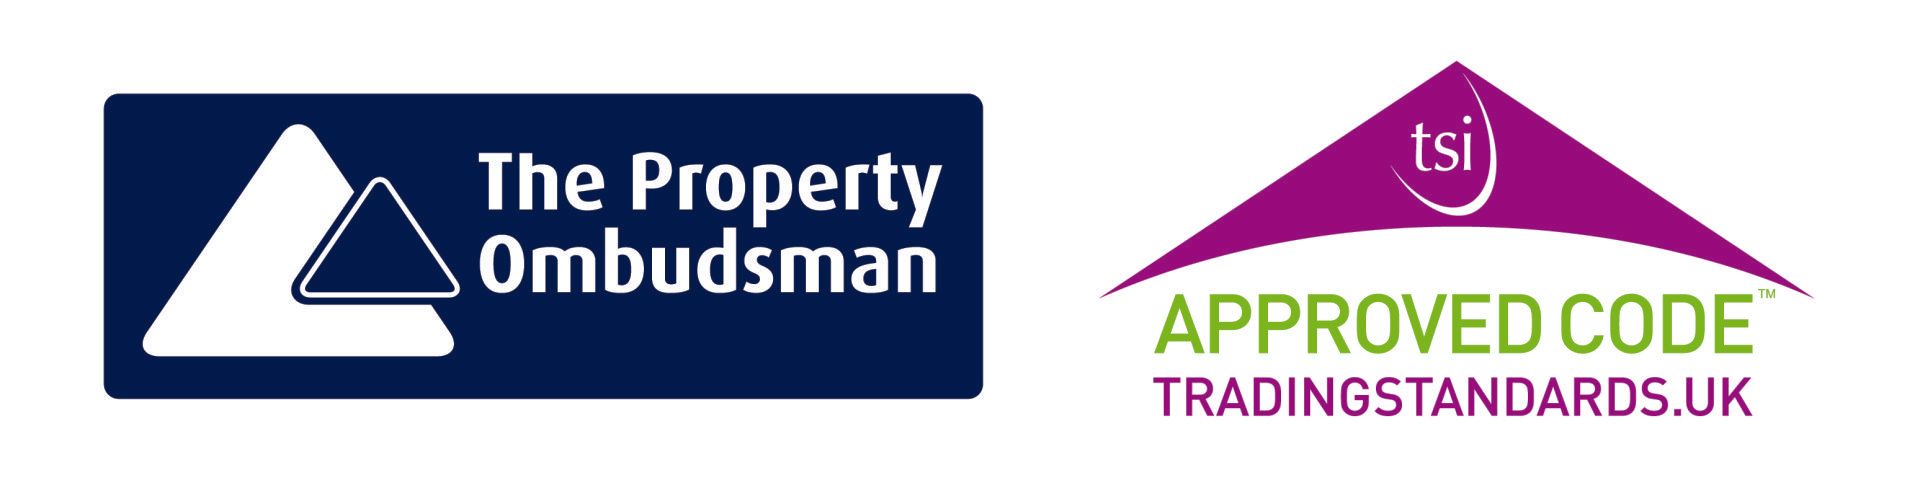 William Grant & Partners are members of The Property Ombudsman Scheme